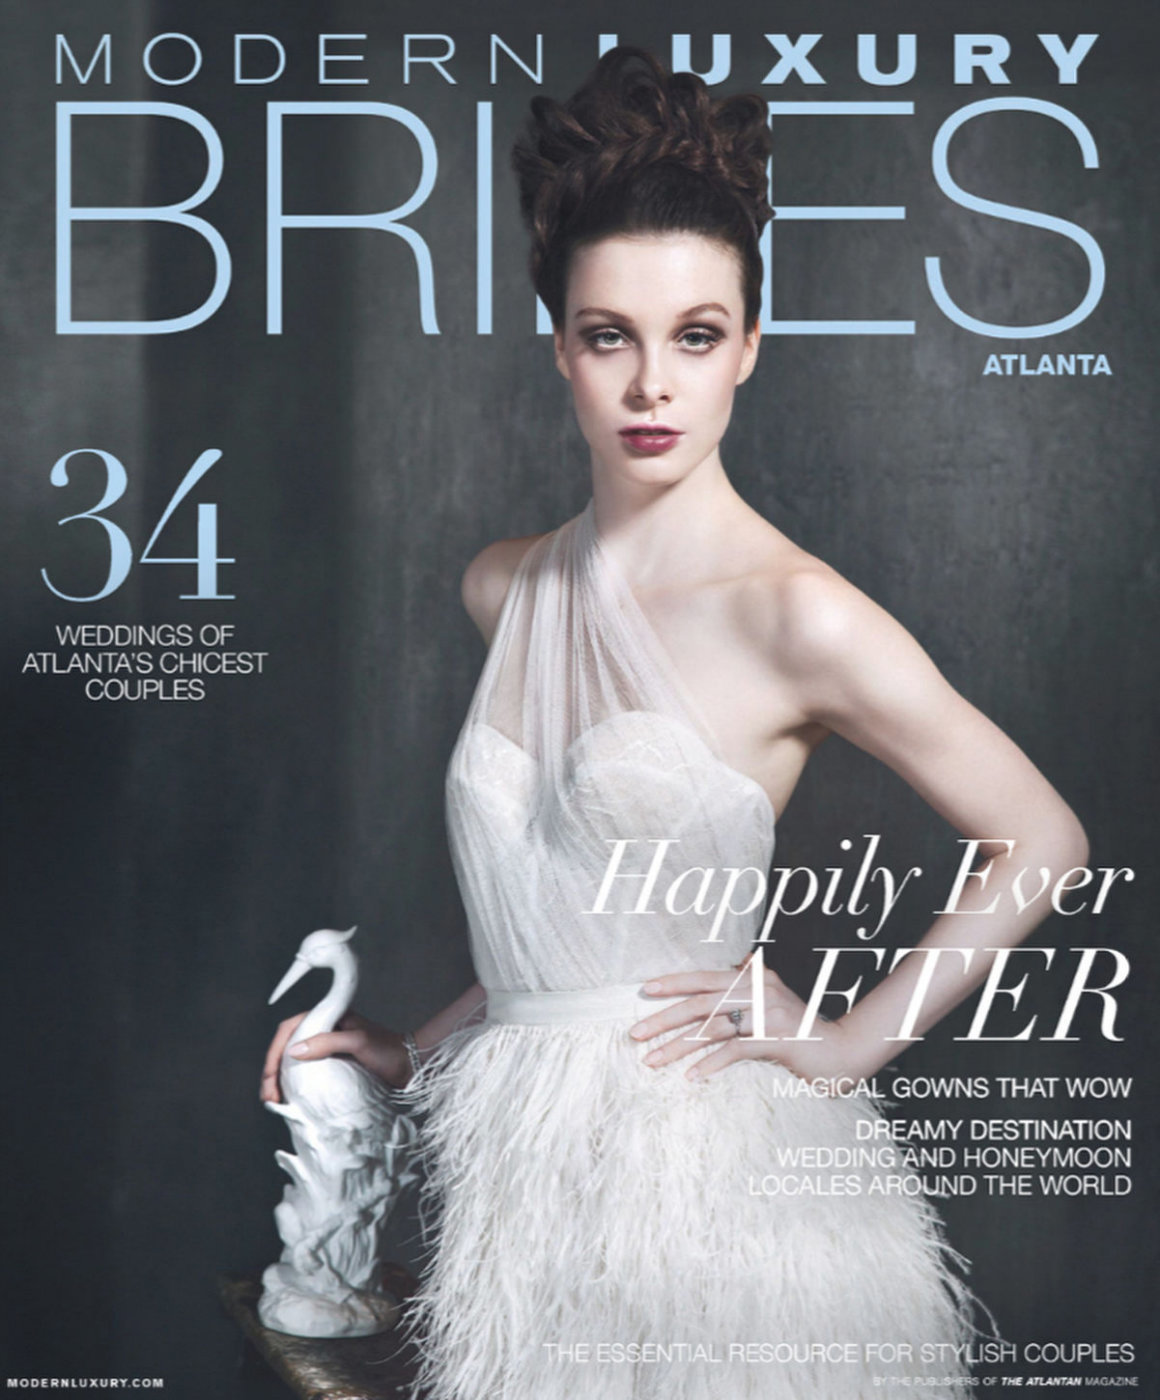 What an honor to see Lauren and Justin's wedding featured in Modern Luxury Brides - Atlanta June 2015 edition. Thank you Phebe Wahl for selecting their beautiful wedding at The Ritz-Carlton Lodge, Reynolds Plantation to be featured... such an incredible honor! Hugs and kisses to all who made this wedding a dream come true for Lauren & Justin!